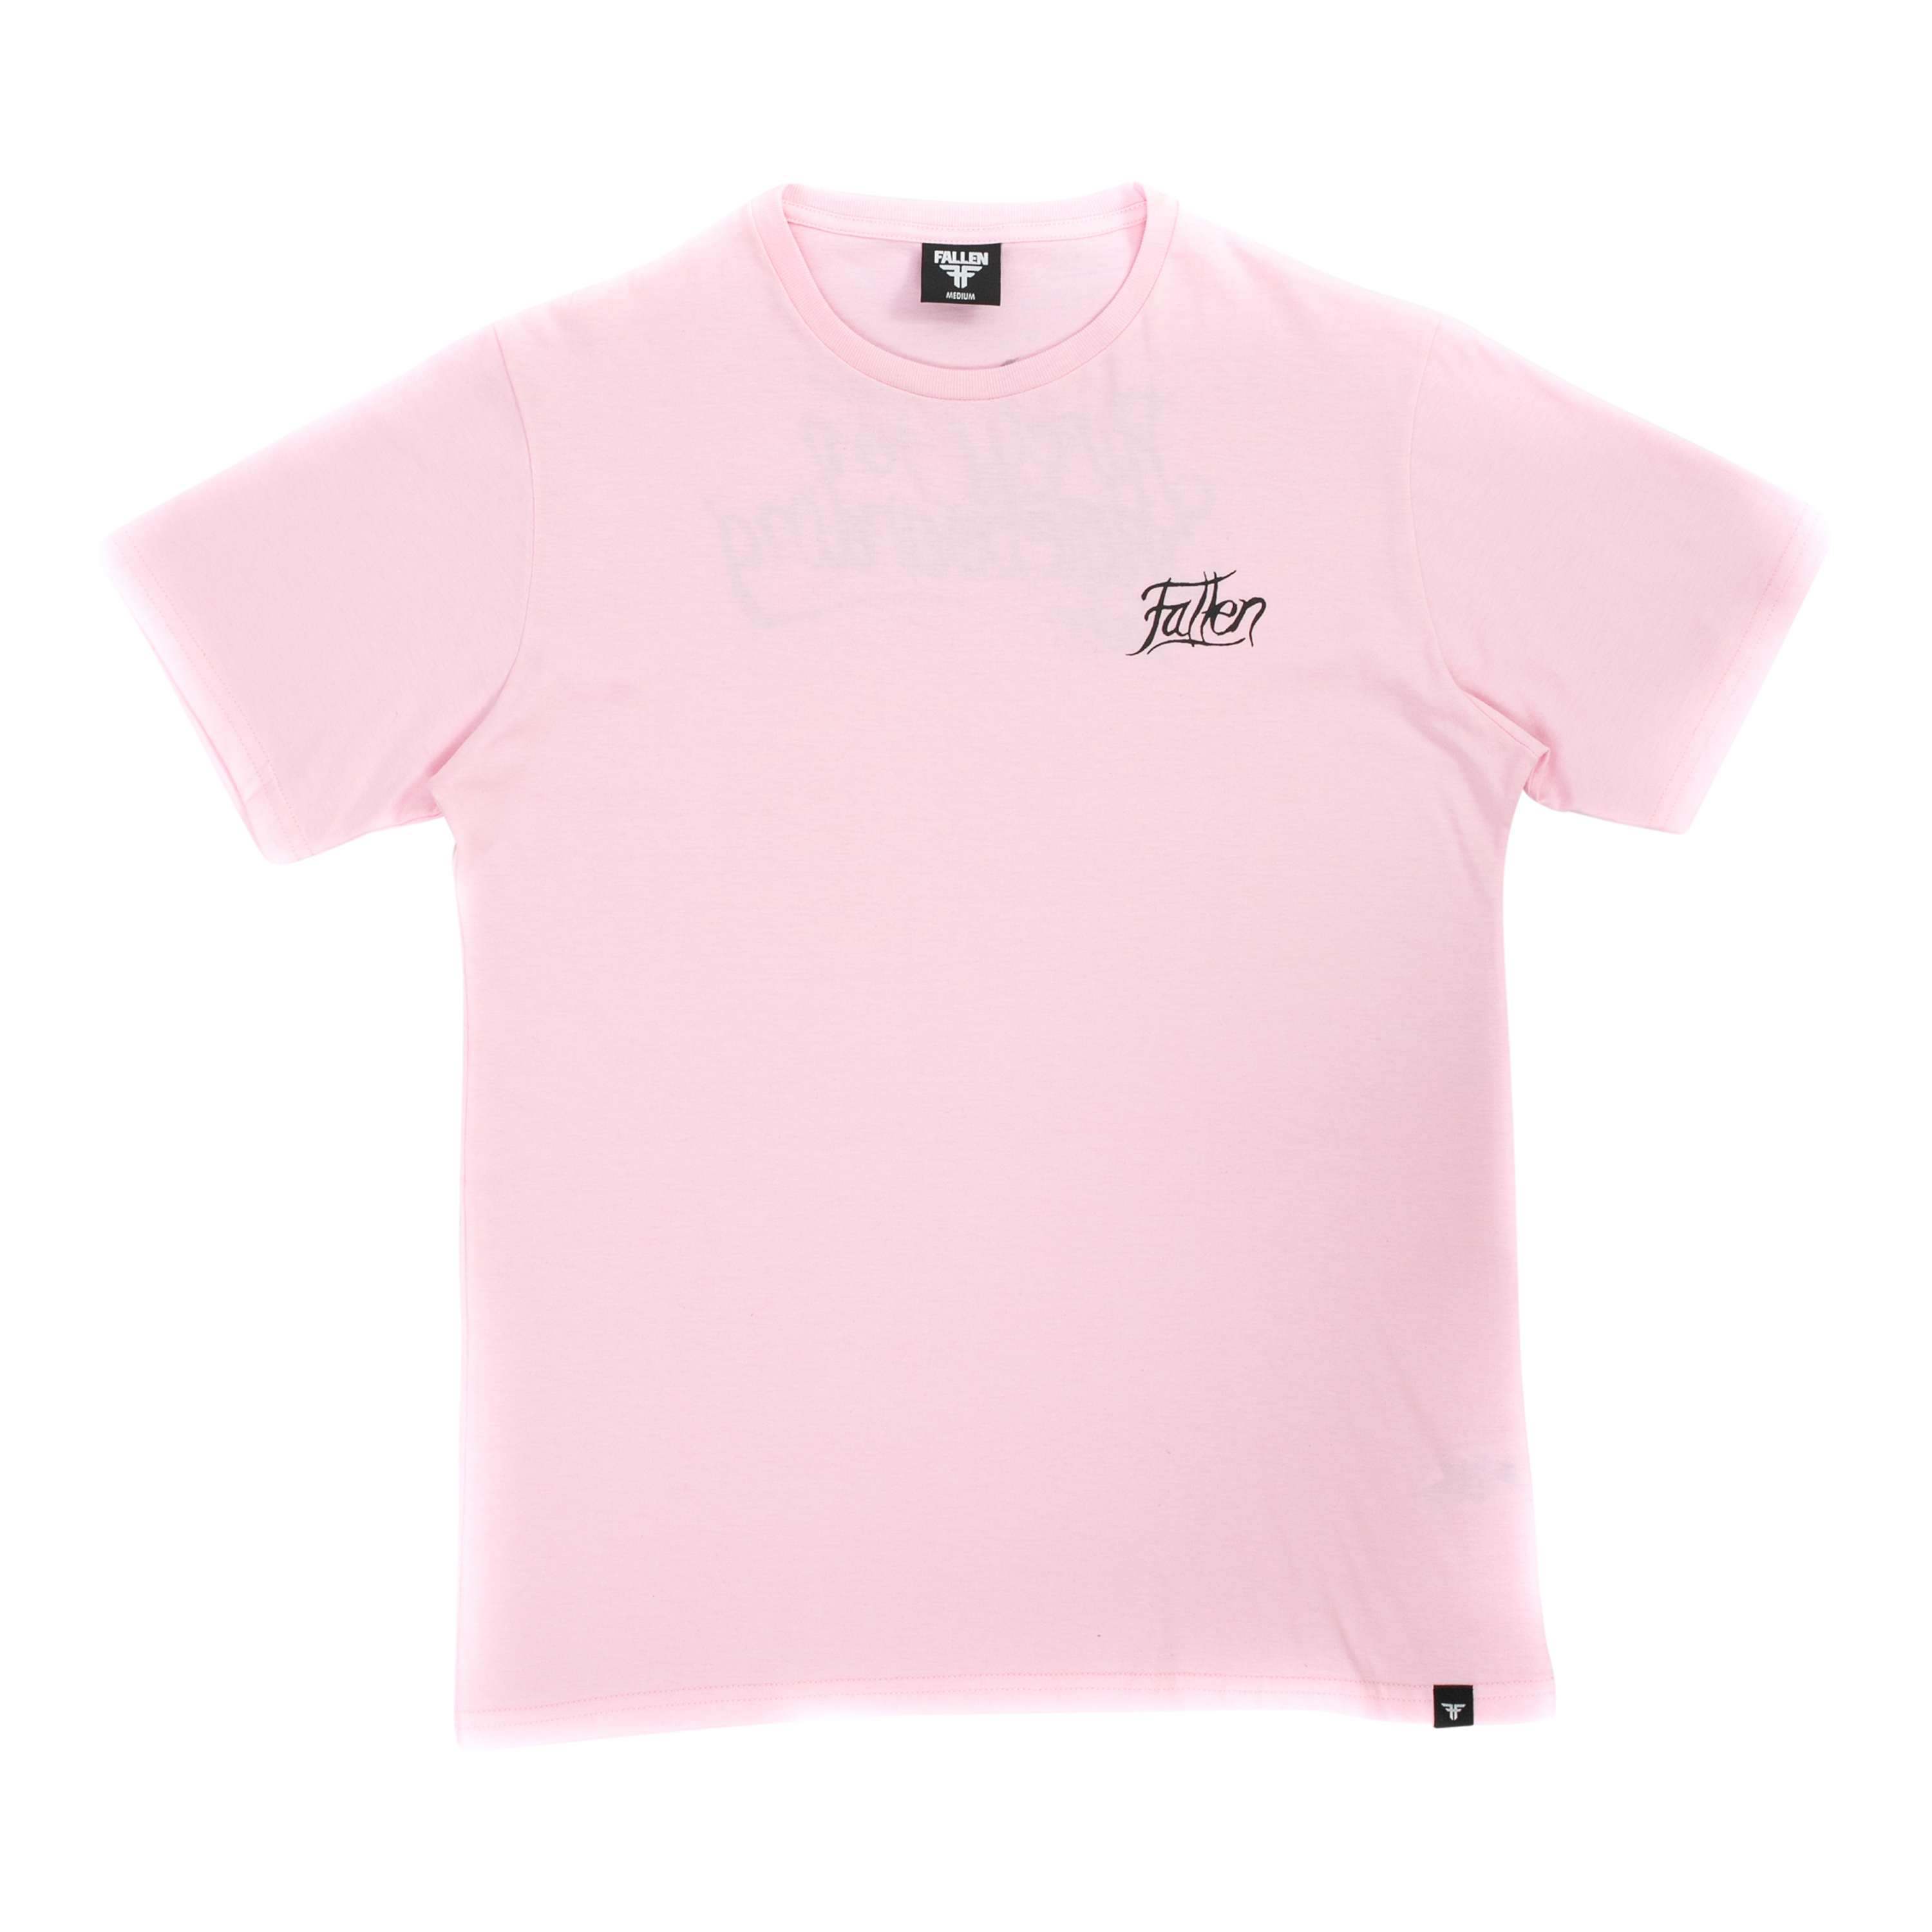 REMERA PURELY FOR - PINK